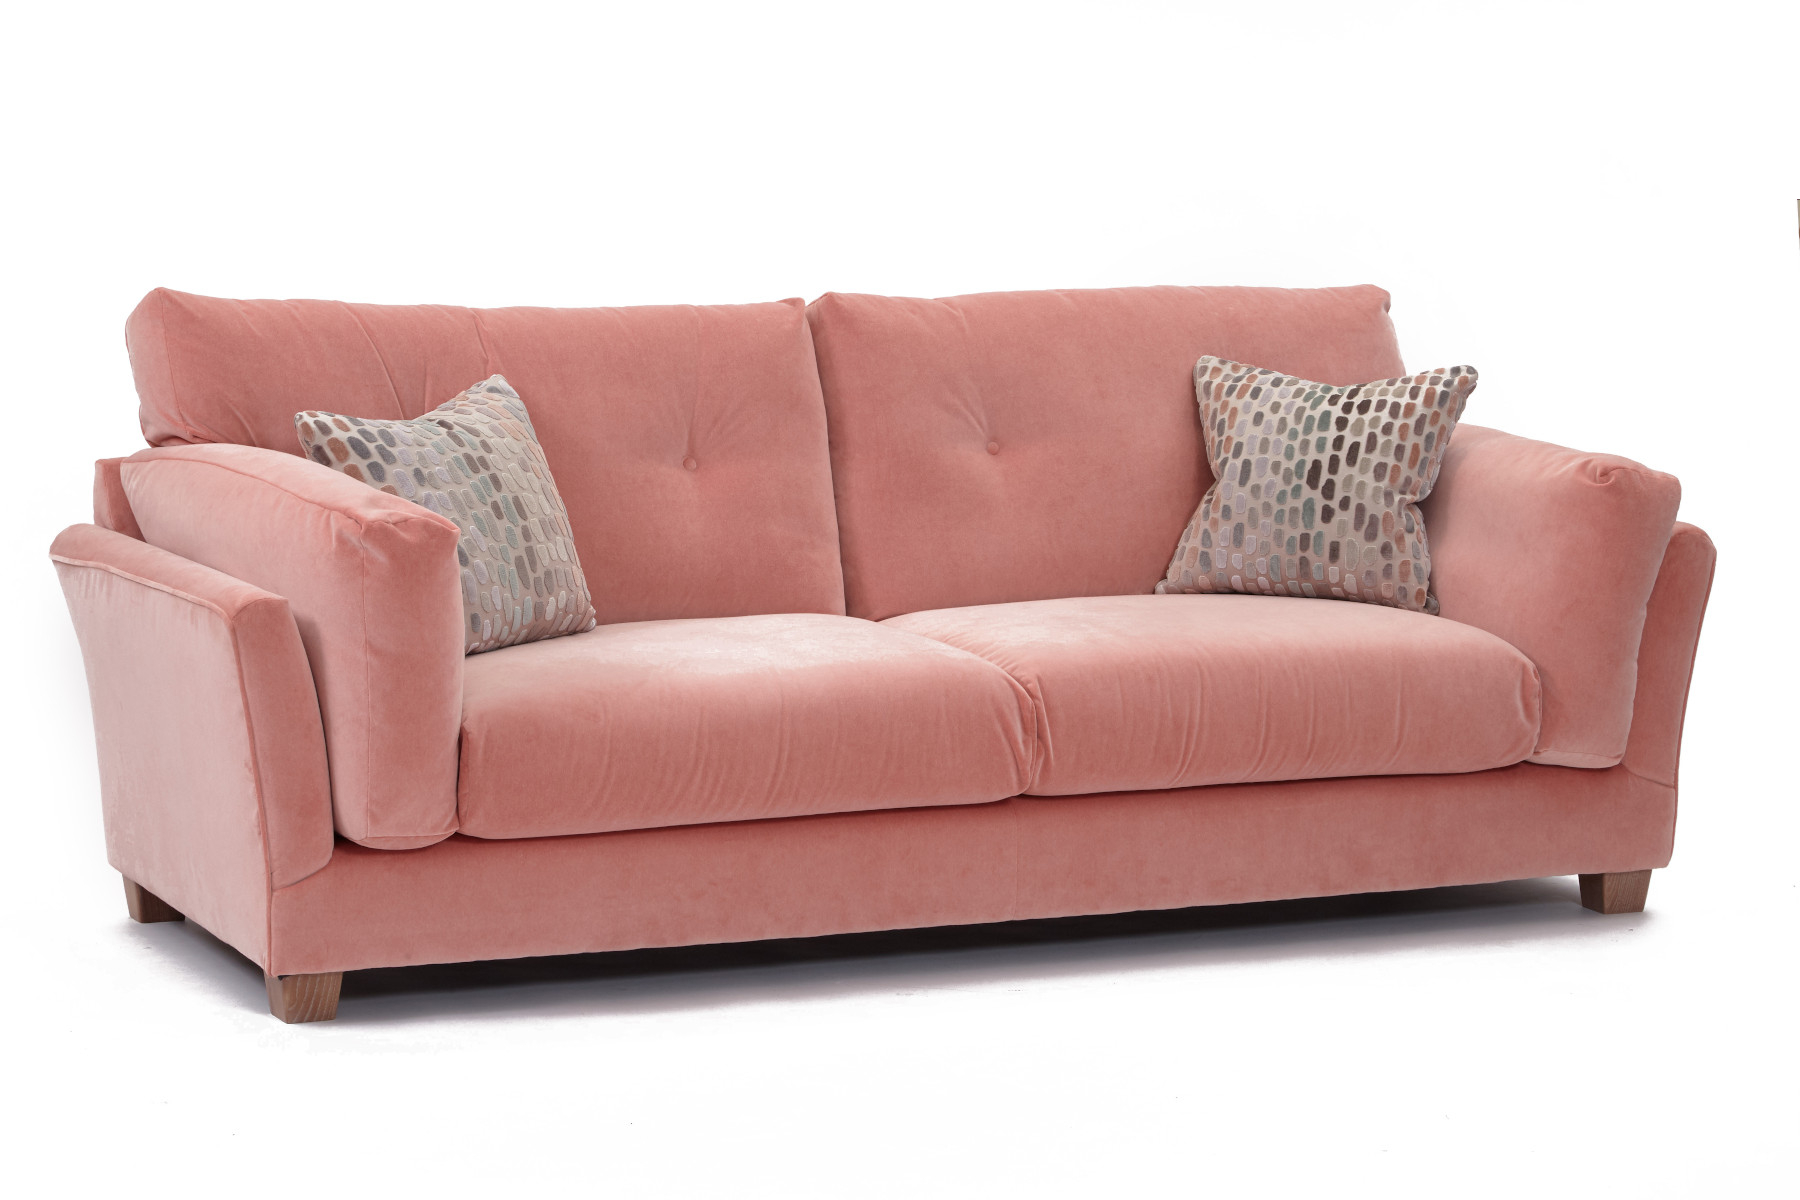 Camille Extra Large Sofa